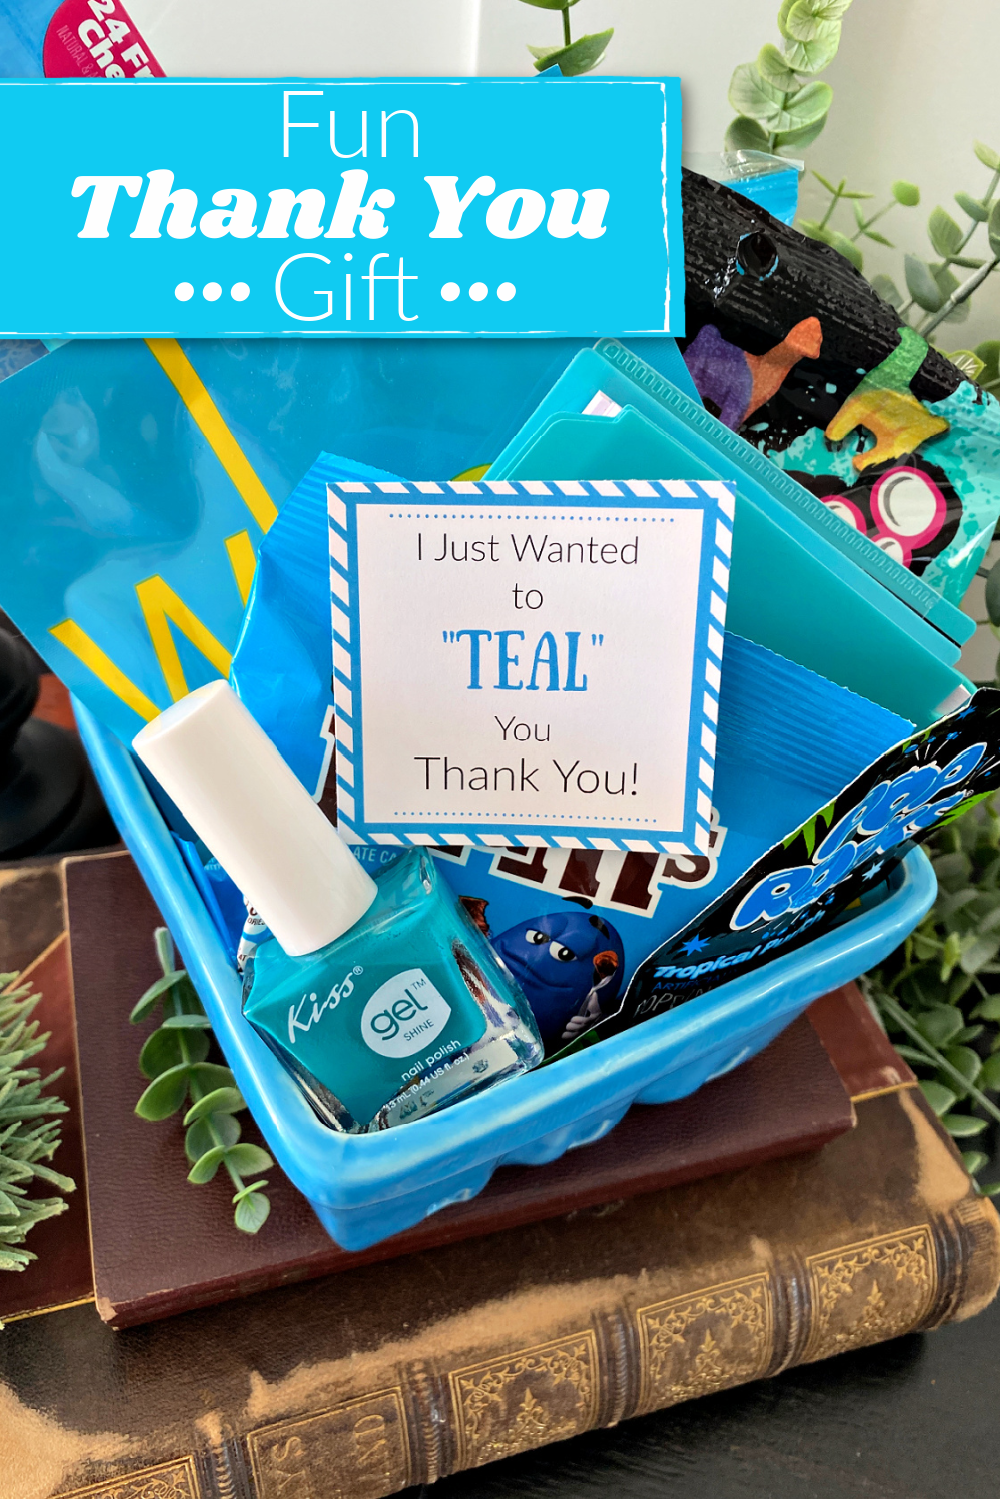 Teal Themed Thank You Gift. This fun thank you gift is the perfect way to say thanks. #thankyougift #funthankyougift #gifts #fungifts #tealthemedgift